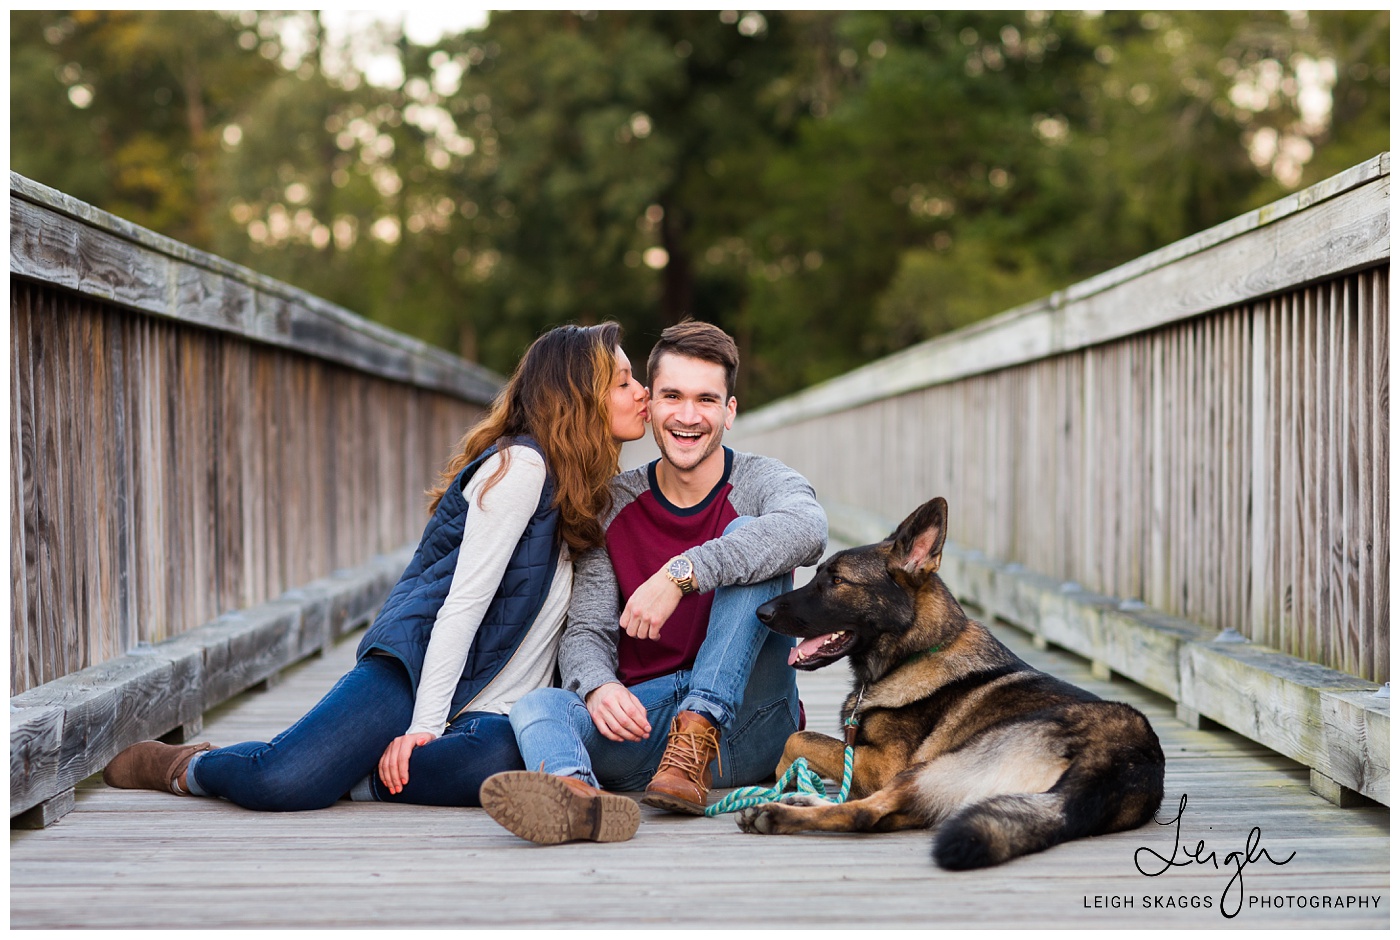 What do I need to know about my Engagement session? | Education Series